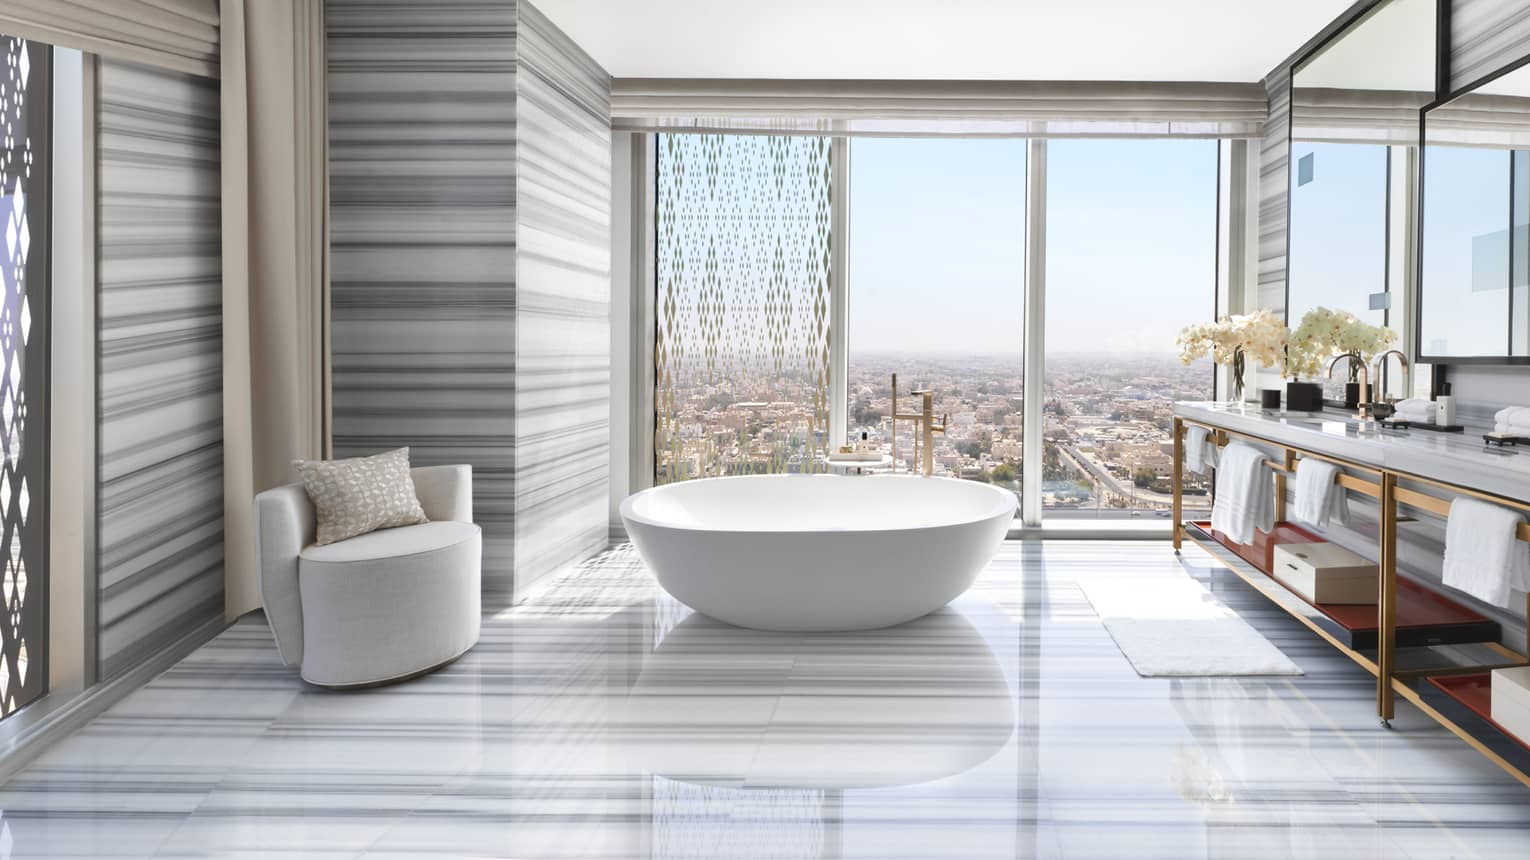 Large Royal Suite bathroom with modern striped marble floors, walls, freestanding tub, armchair